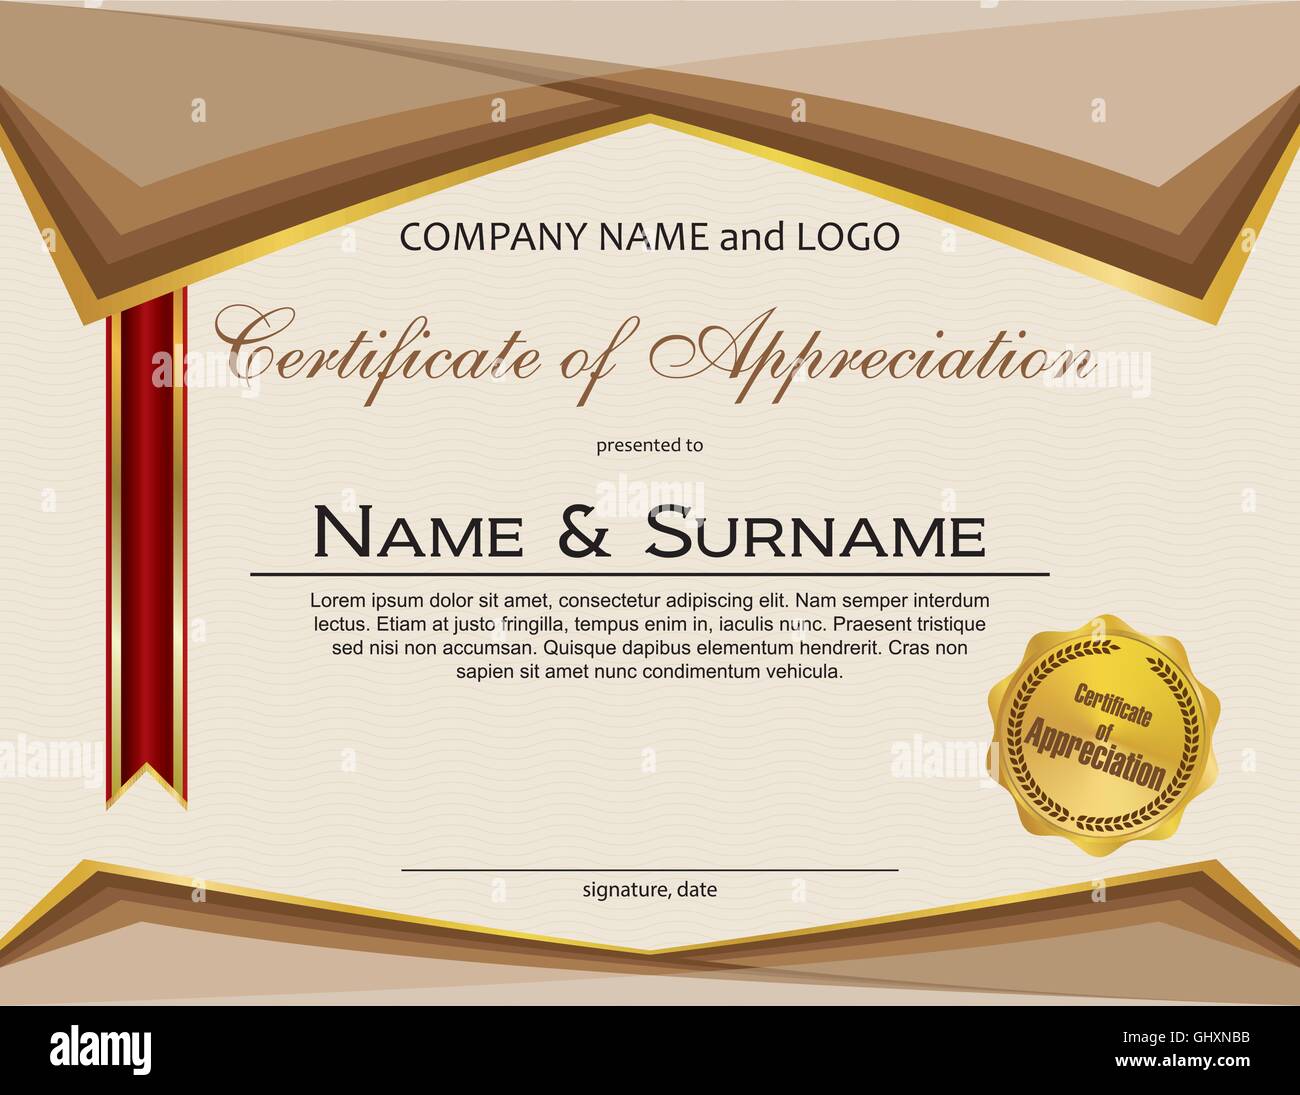 Certificate of Appreciation with medal and ribbon Stock Vector